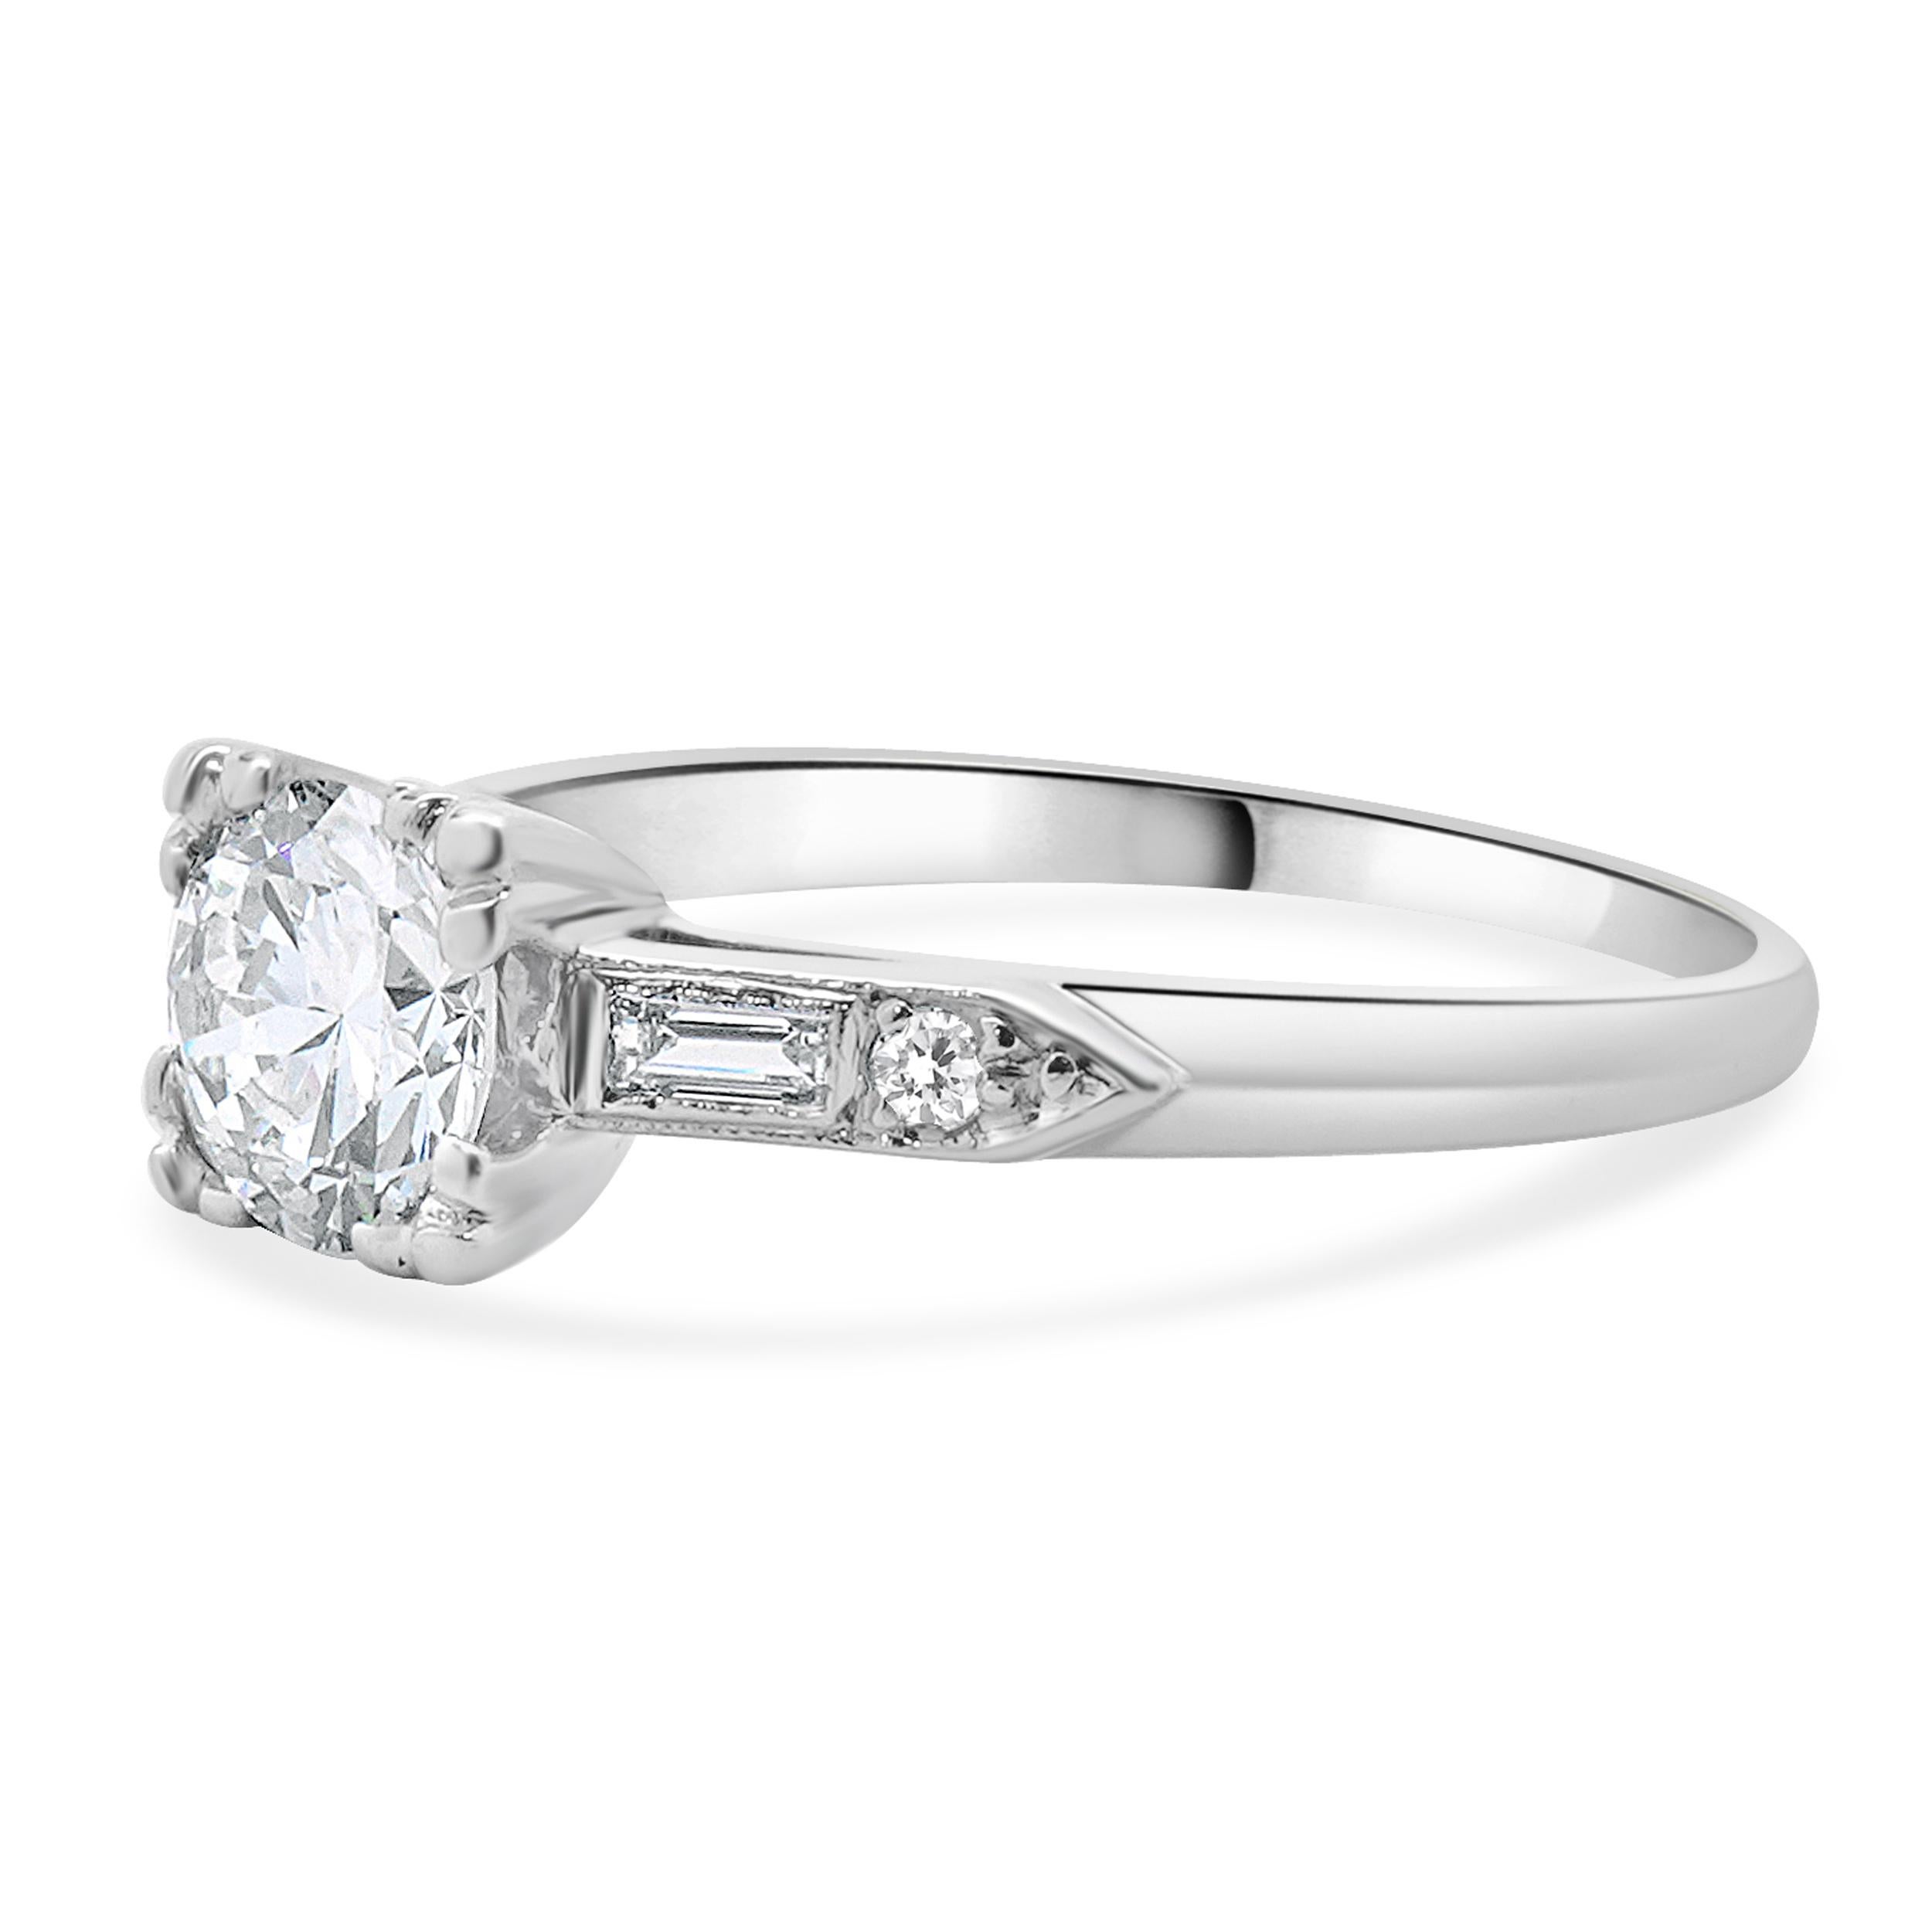 Designer: custom
Material: platinum
Diamond:  1 round european cut = 0.50ct
Color: H
Clarity: SI1
Diamond:  4 old mine cut = 0.12ct
Color: H
Clarity: SI1
Dimensions: ring top measures 5.6mm wide
Ring Size: 5.5 (complimentary sizing